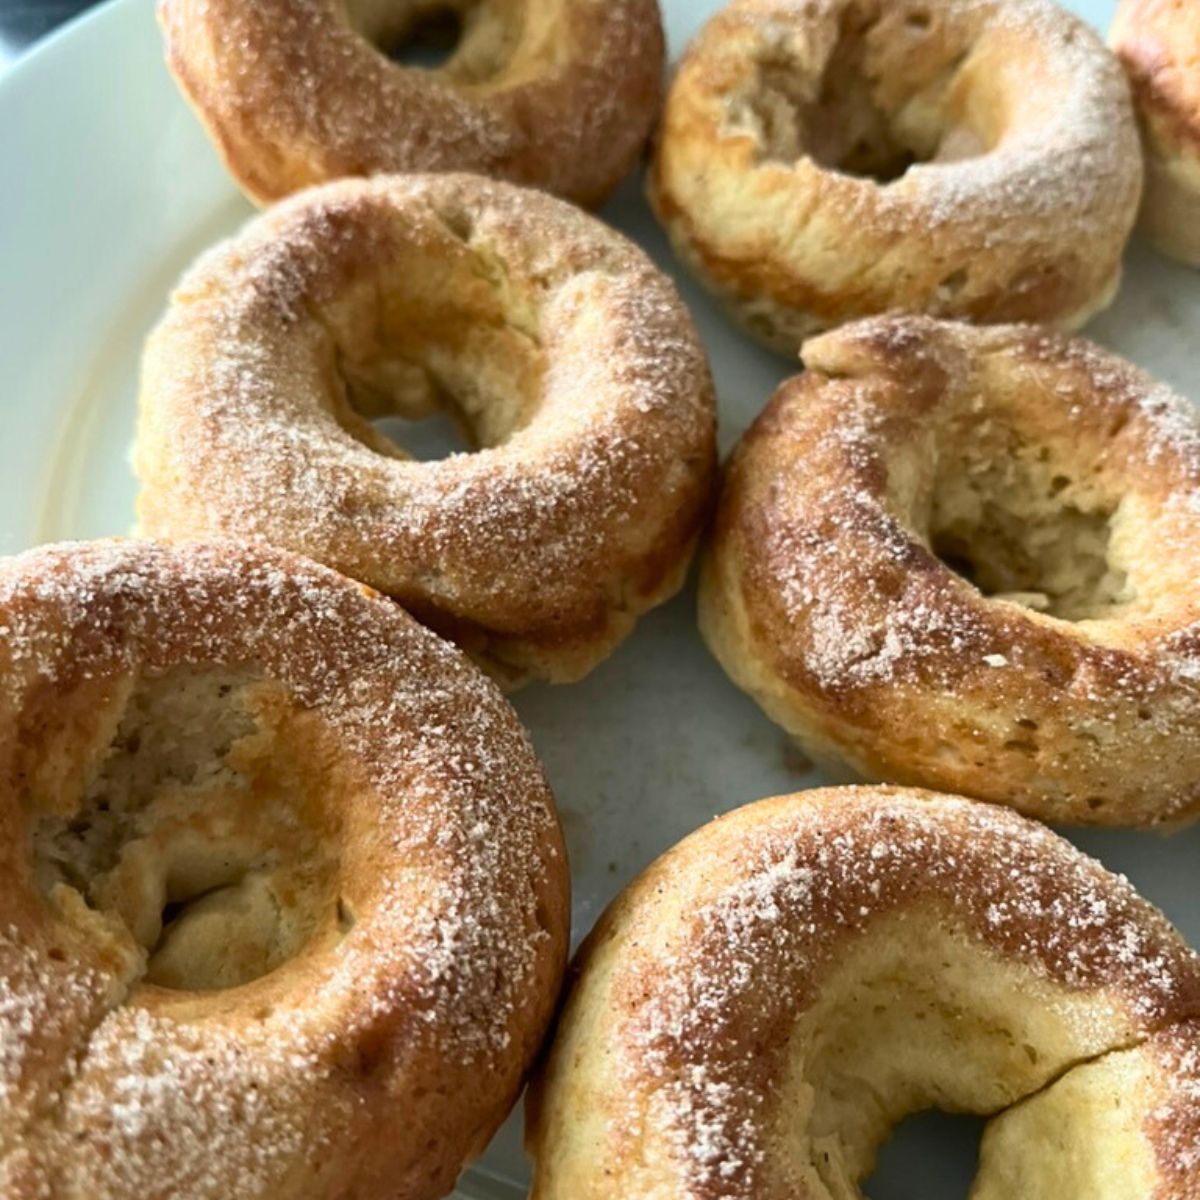 a plate of sourdough donuts sprinkled with spiced sugar.